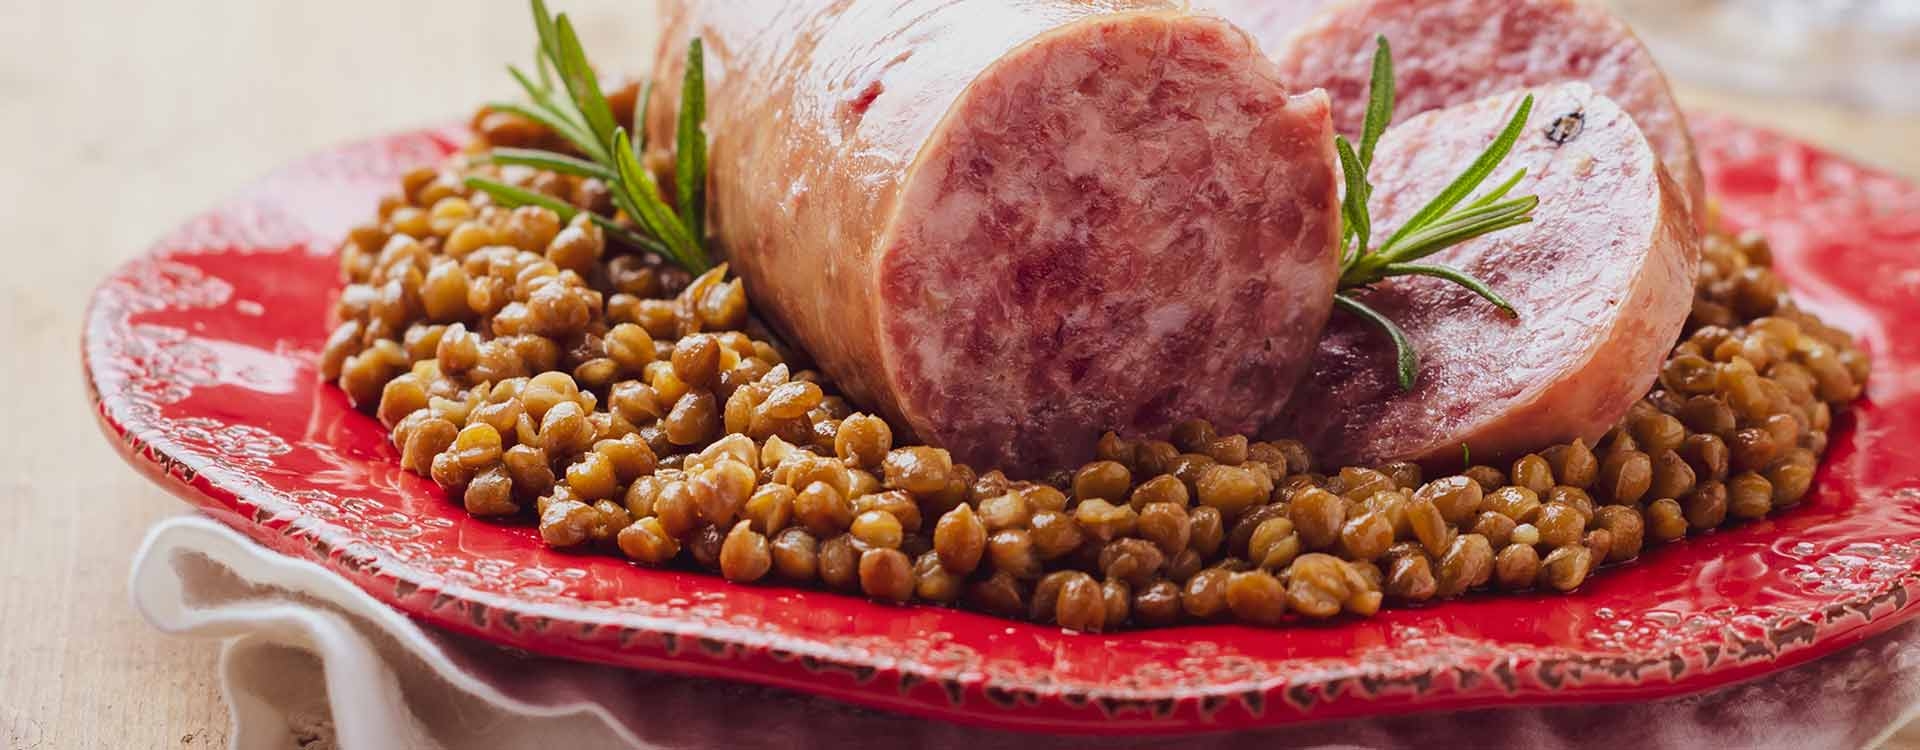 Cotechino, a must-have for your holiday meal